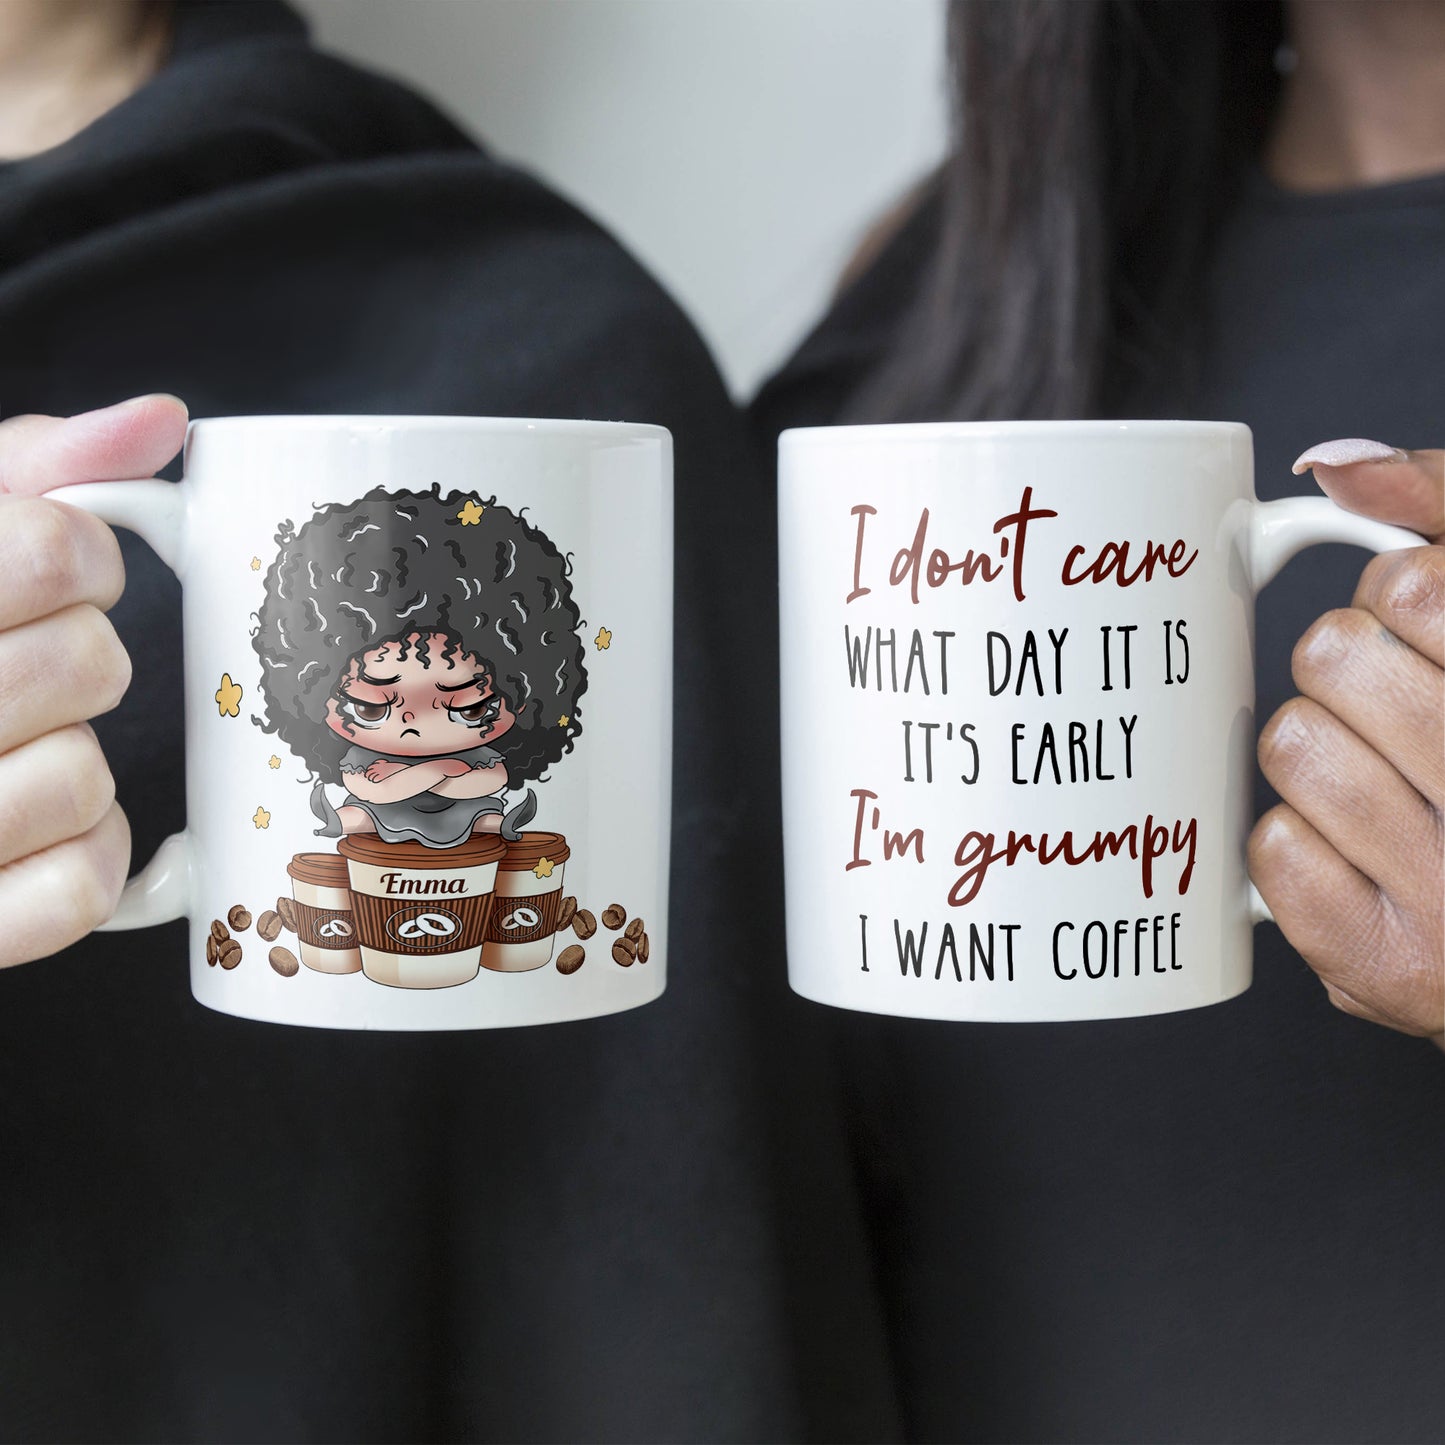 It's Early I'm Grumpy I Want Coffee - Personalized Mug - Birthday Gift, Funny Gift For Coffee Lovers